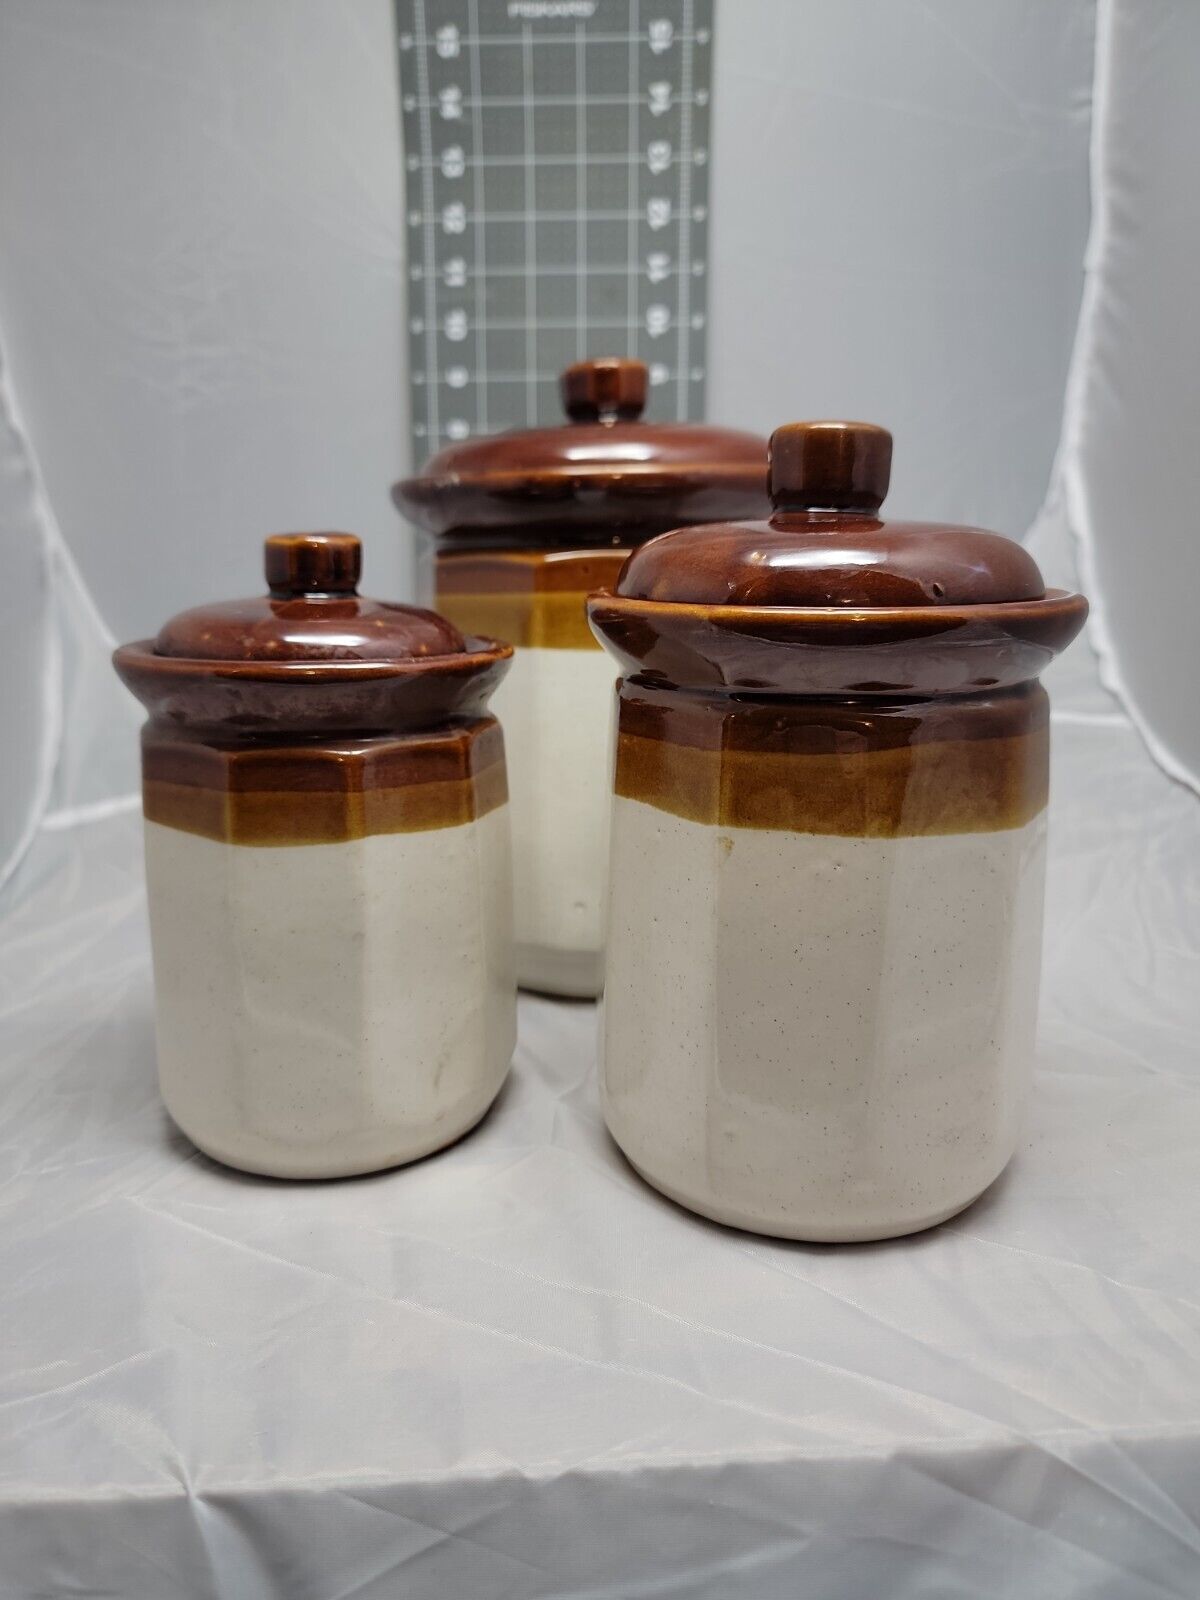 Vintage Stoneware tri-tone Brown/White Canisters jars w/lids, Set Of 3 Taiwan